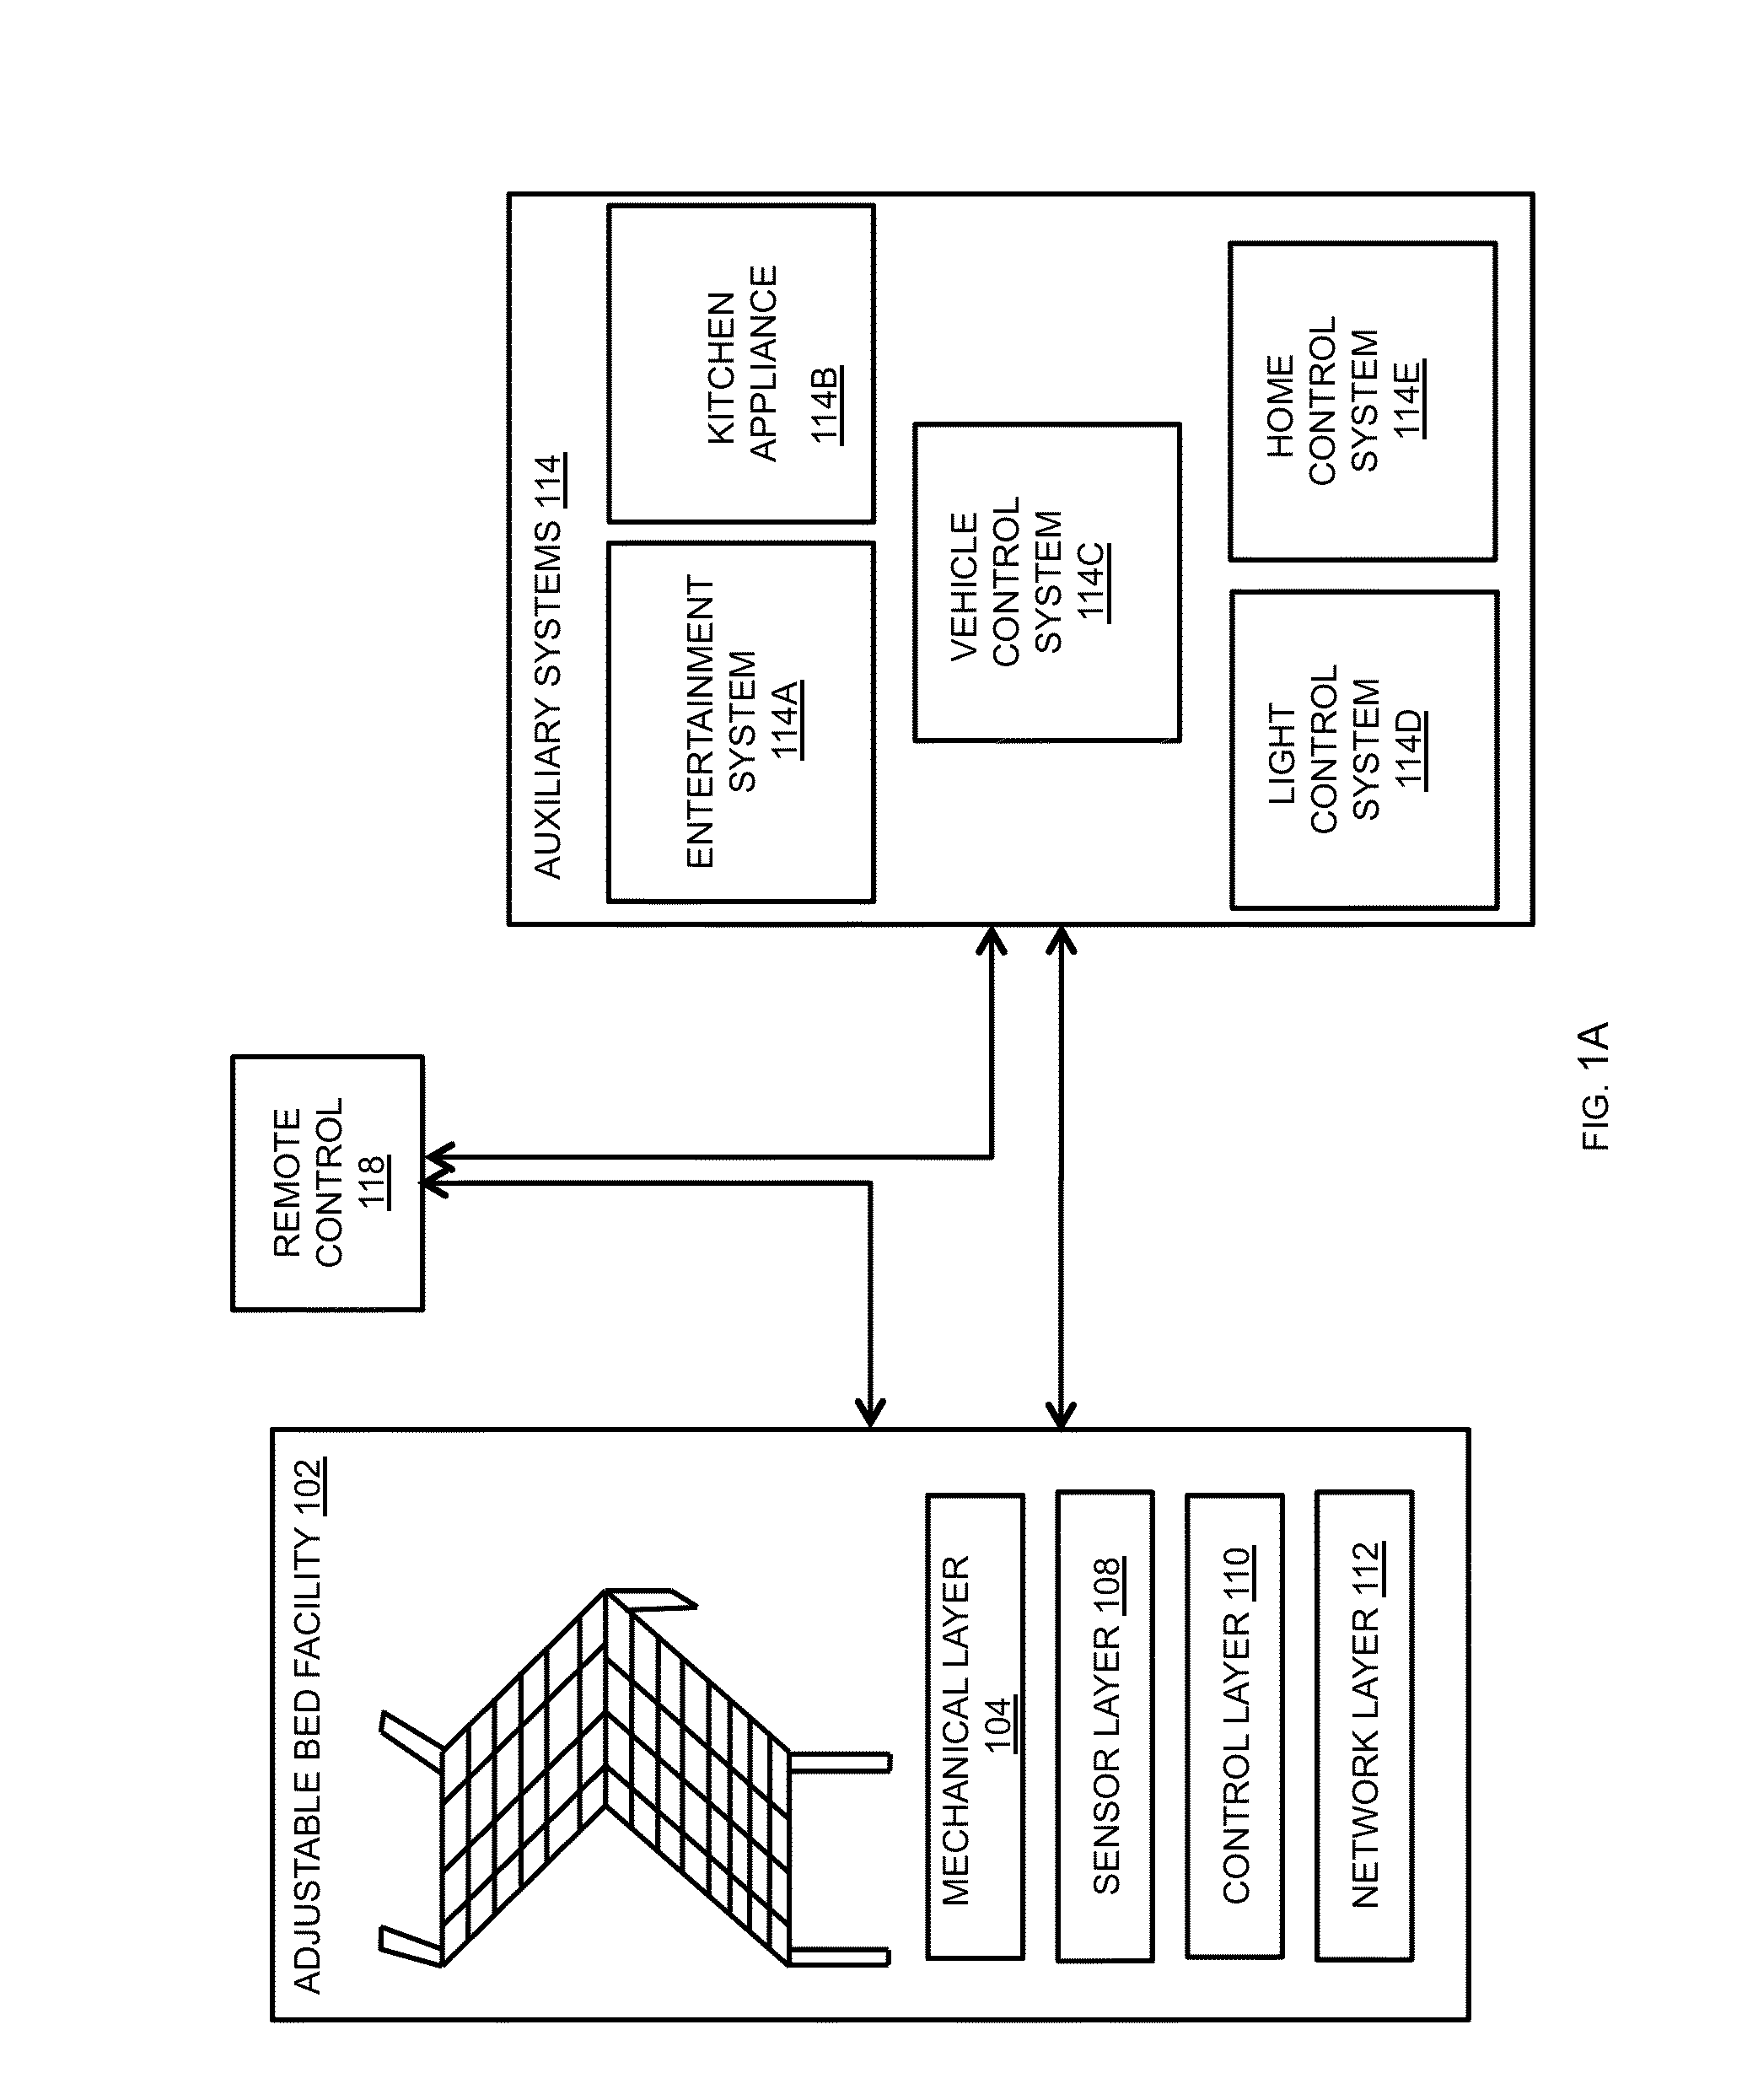 System and method of a bed with a safety stop